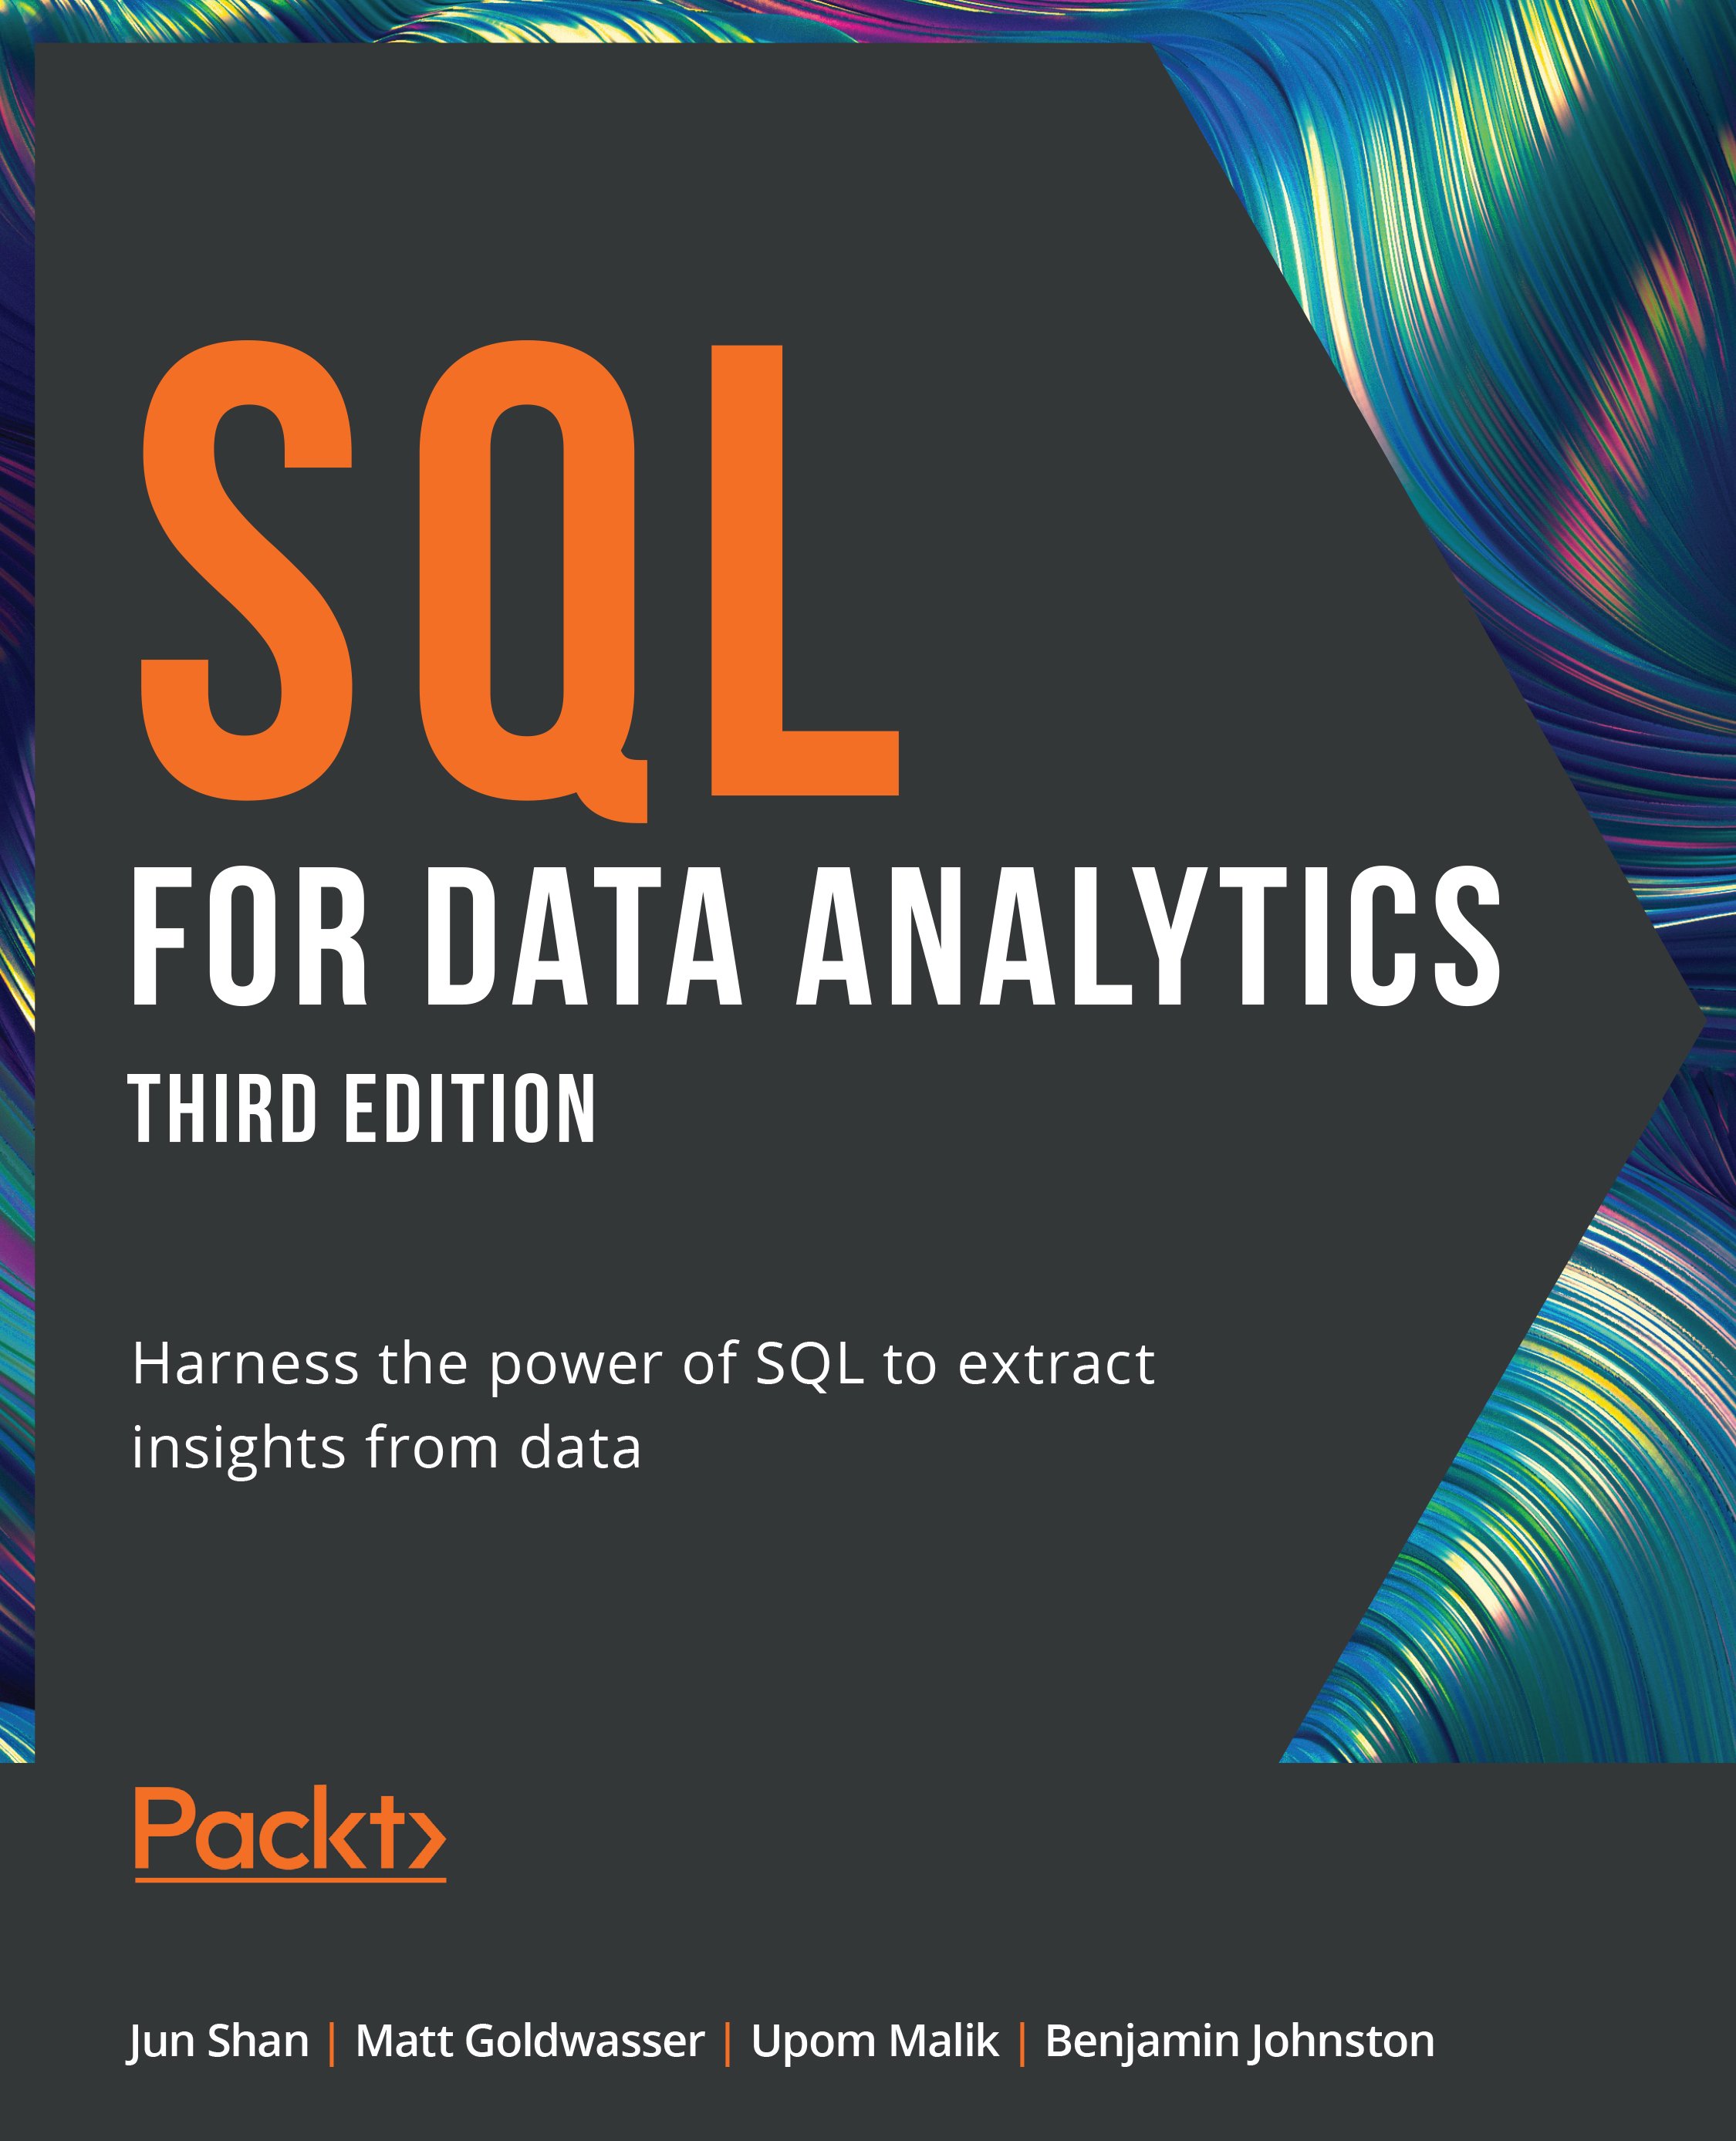 SQL for Data Analytics: Harness the power of SQL to extract insights from data, Third Edition